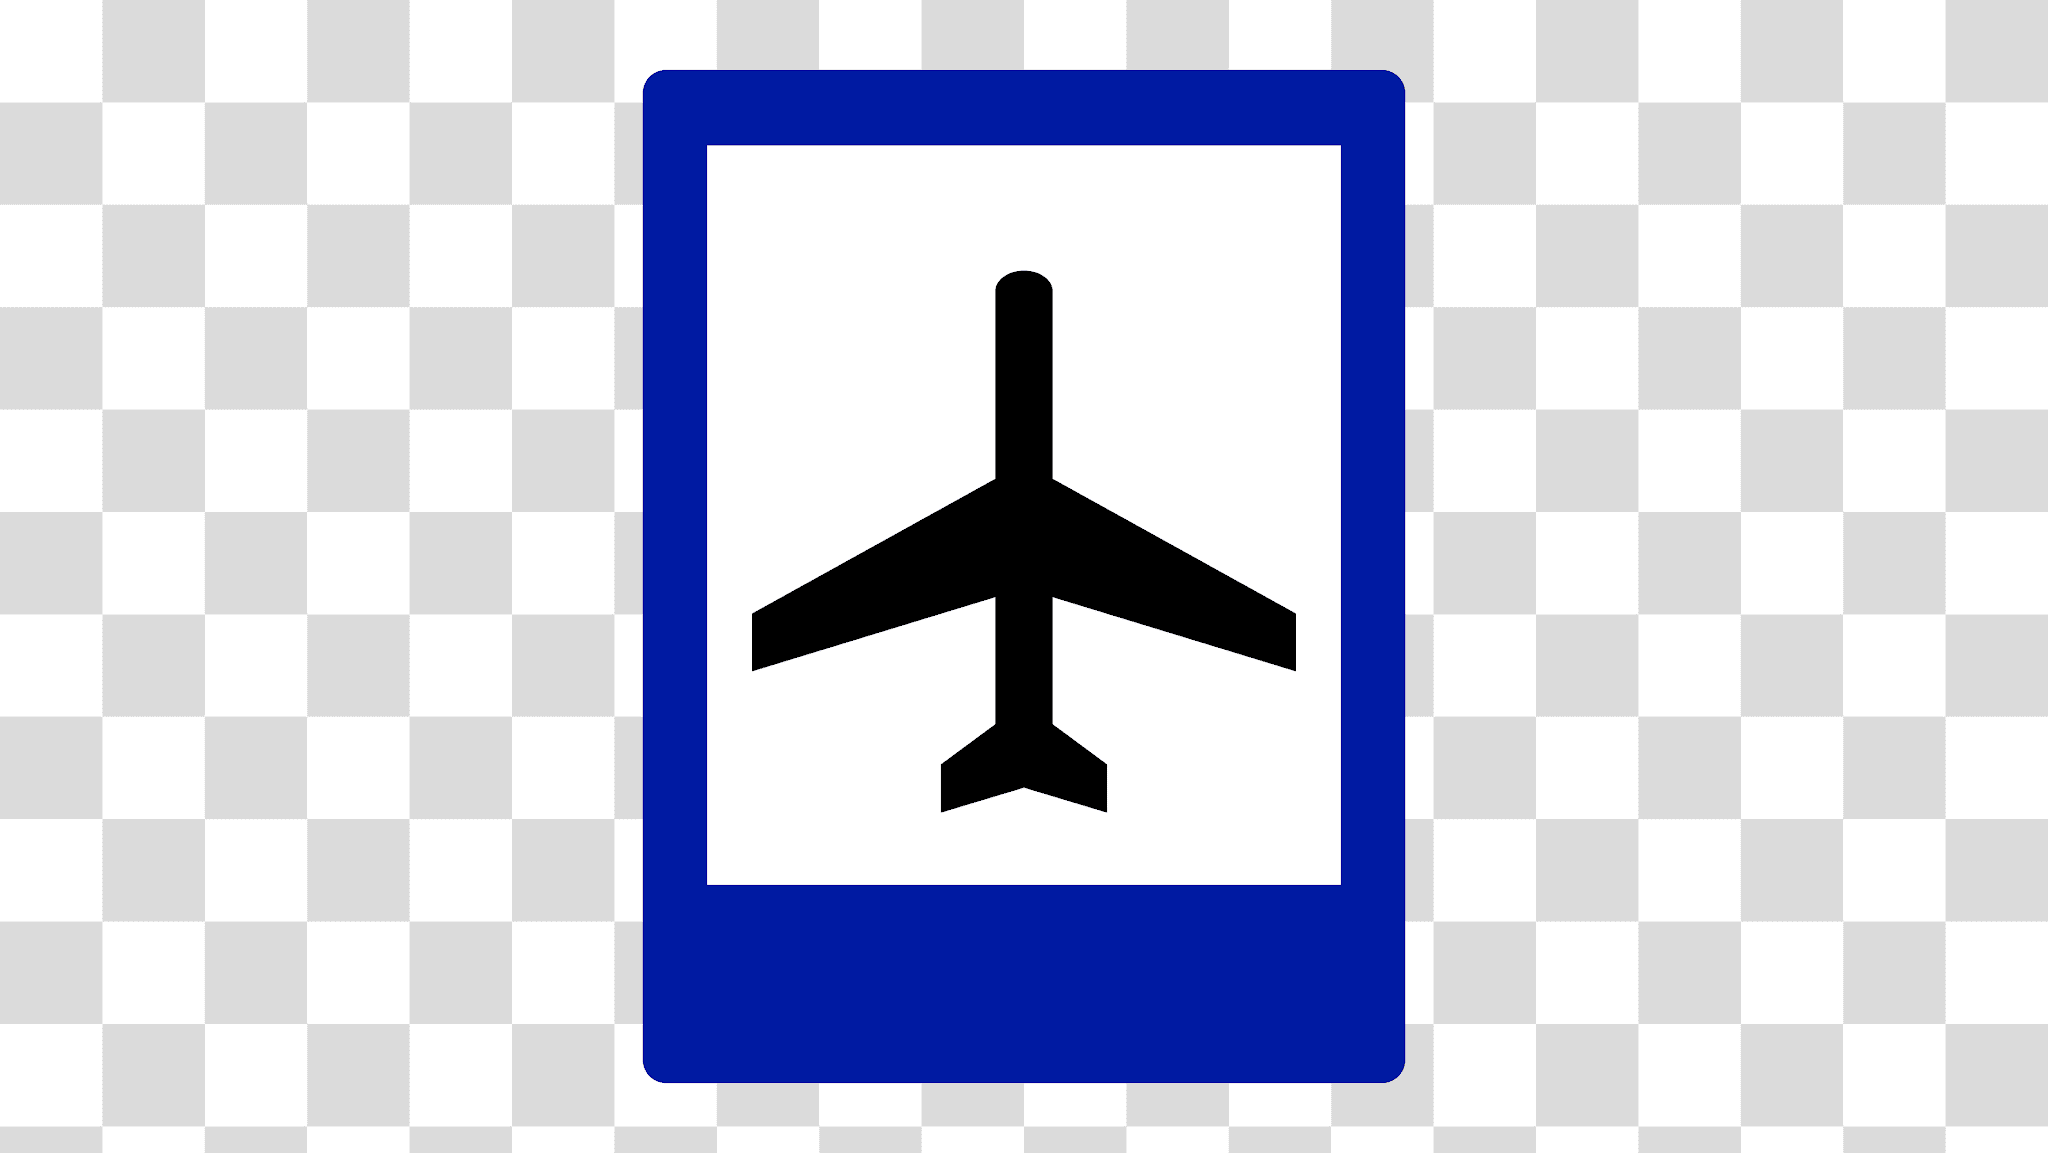 Indonesian Airport Sign PNG Transparent Image